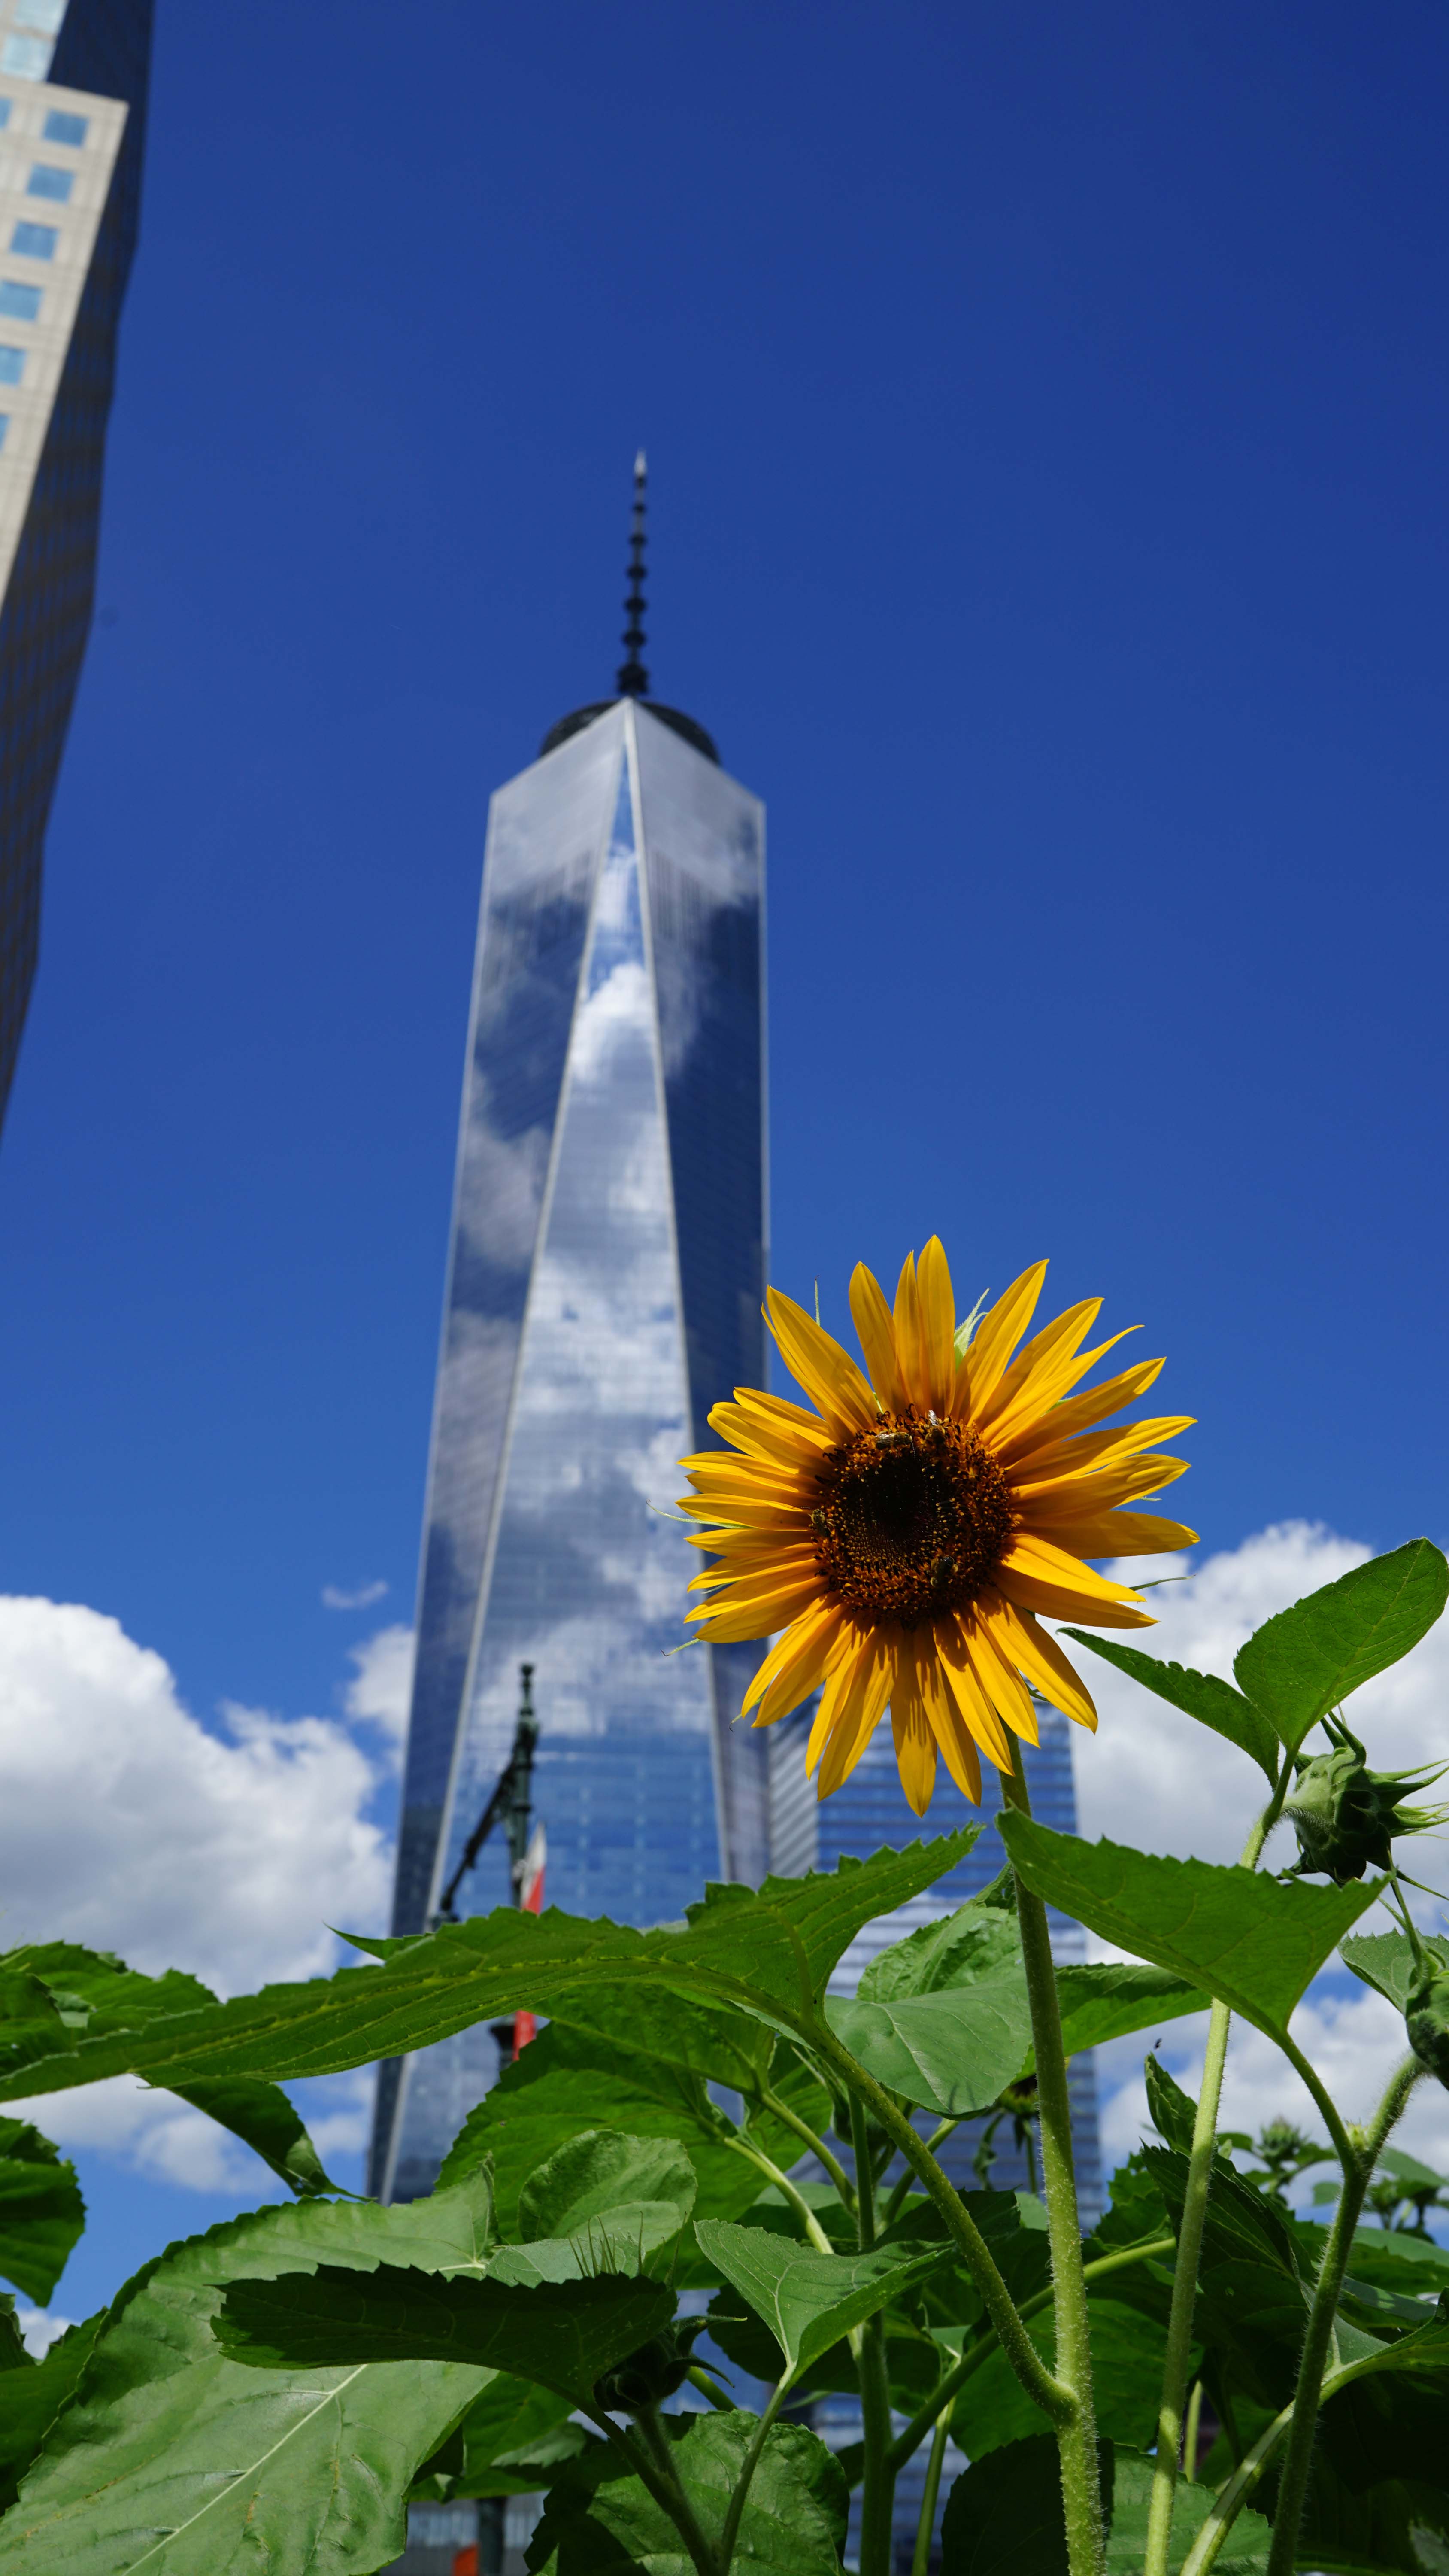 sunflowers and bees and 1 WTC 8-13-2015